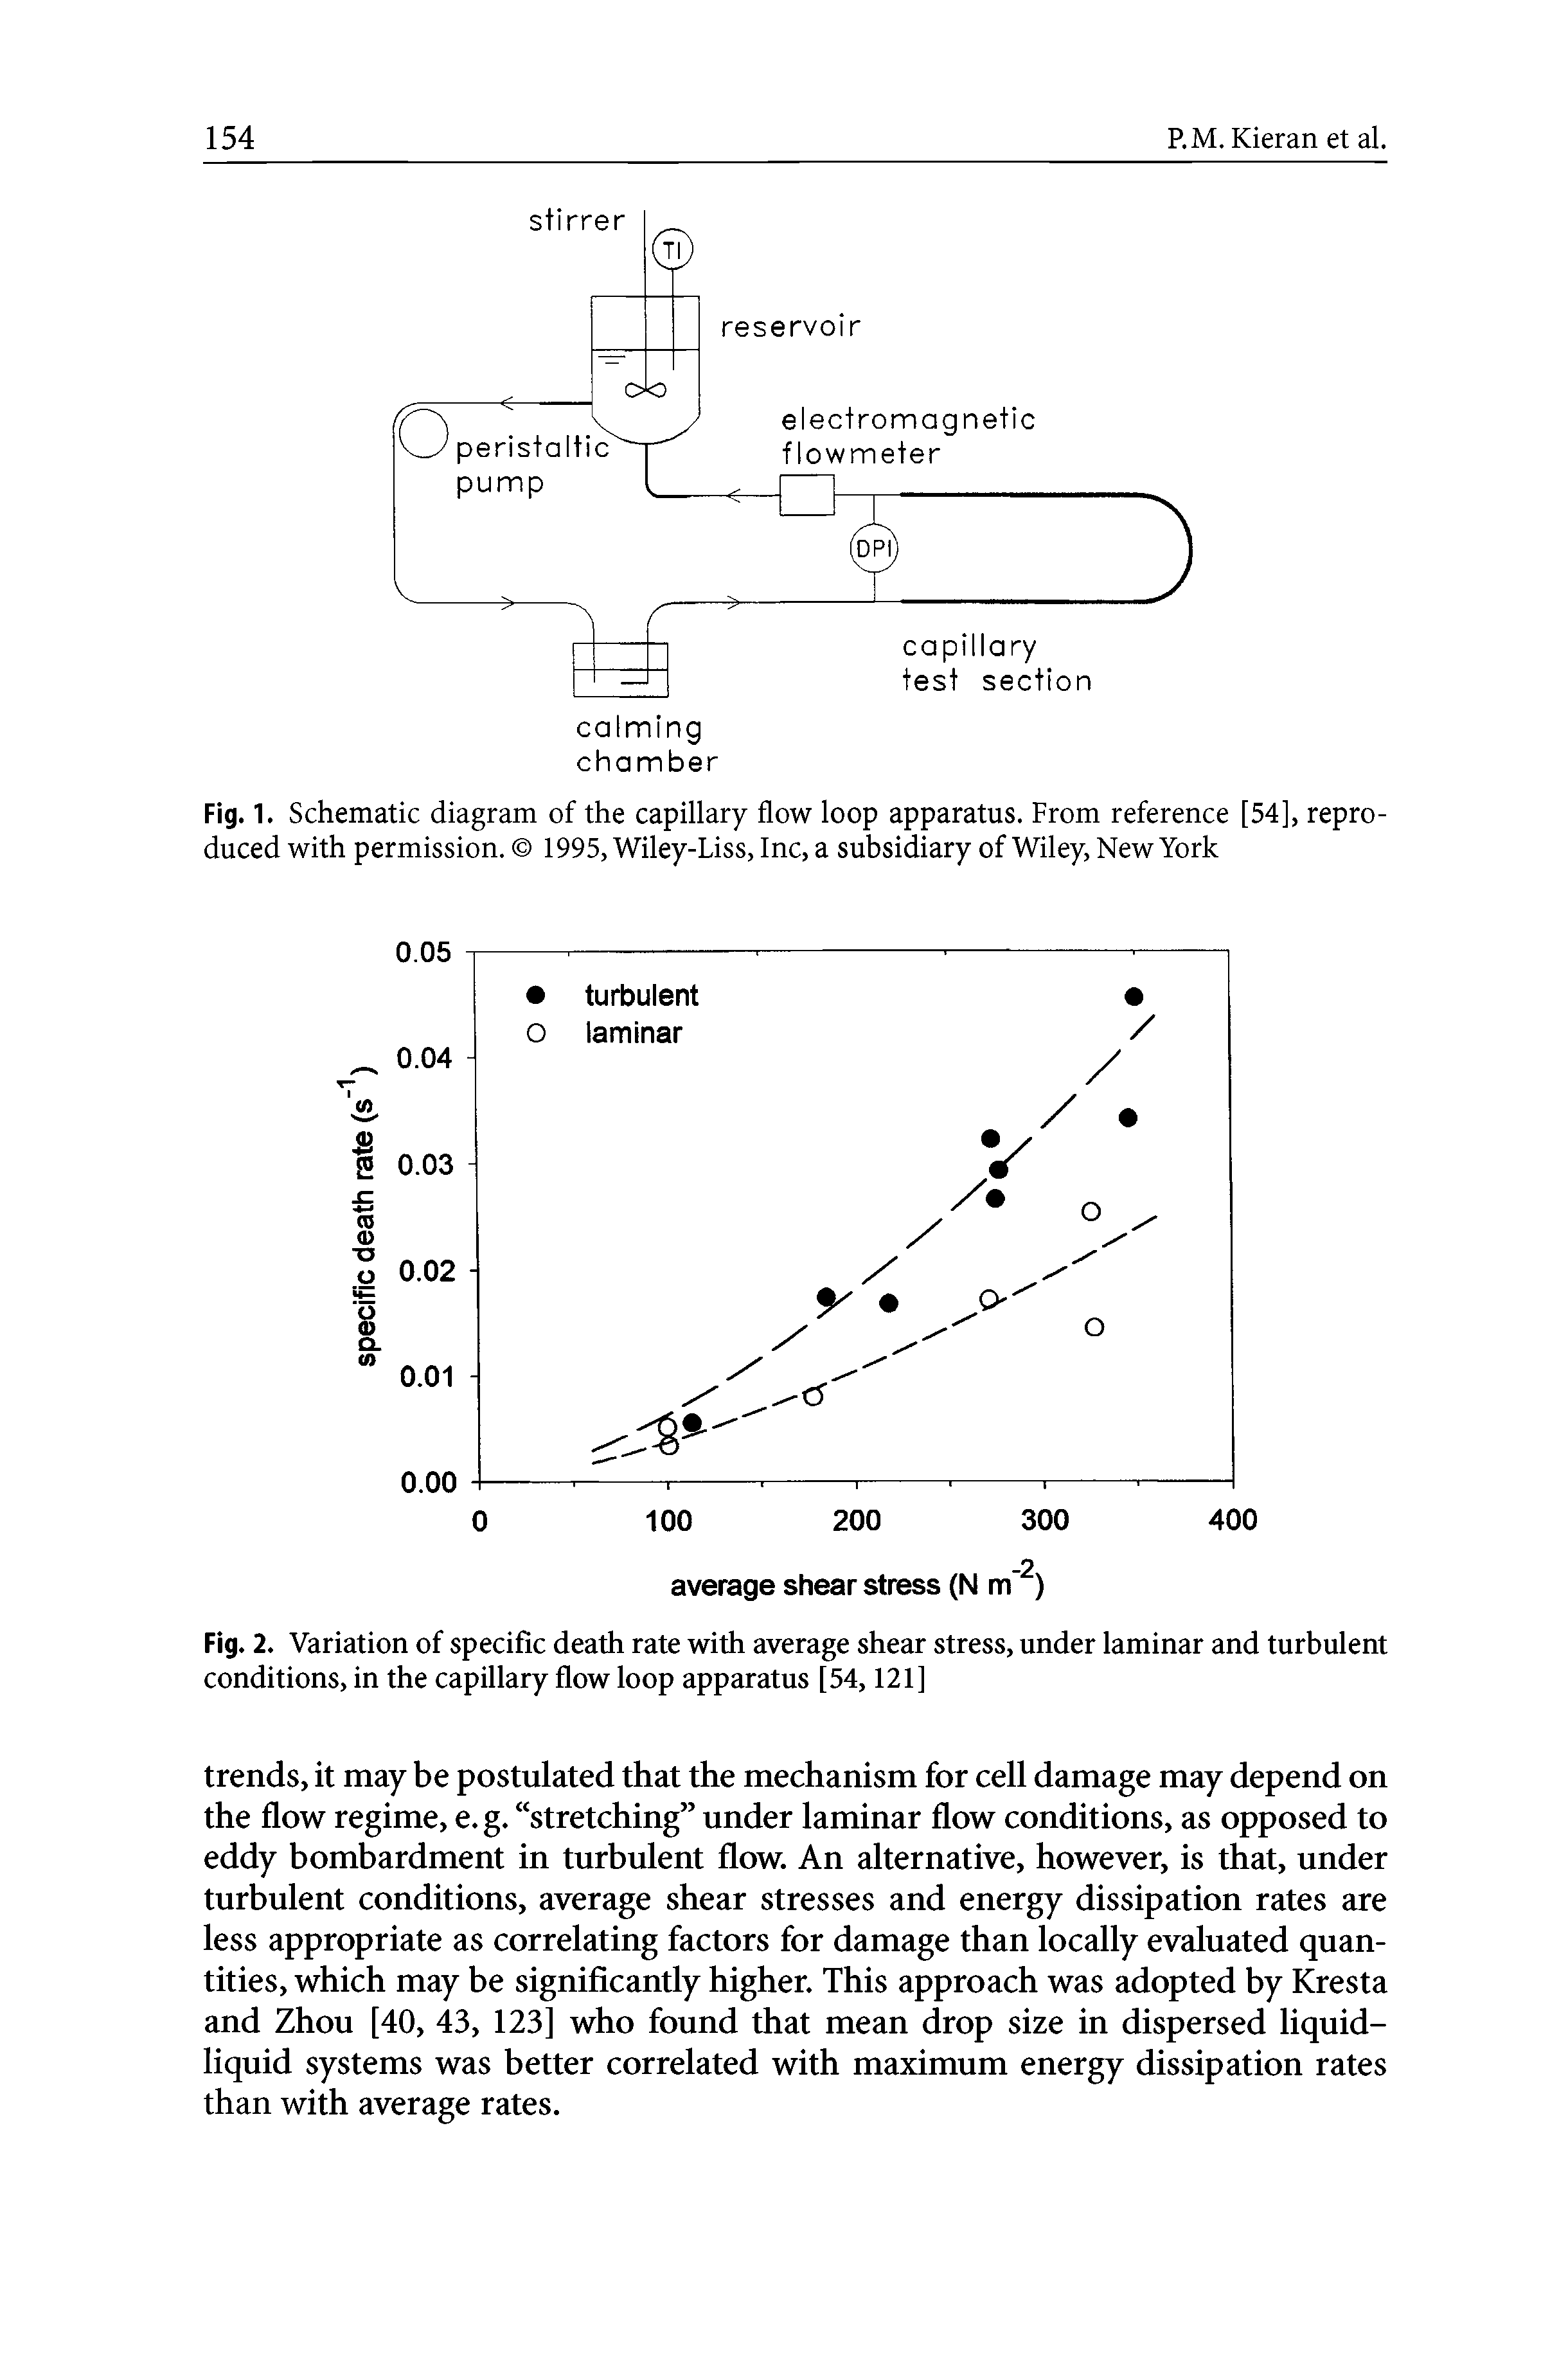 Fig. 2. Variation of specific death rate with average shear stress, under laminar and turbulent conditions, in the capillary flow loop apparatus [54,121]...